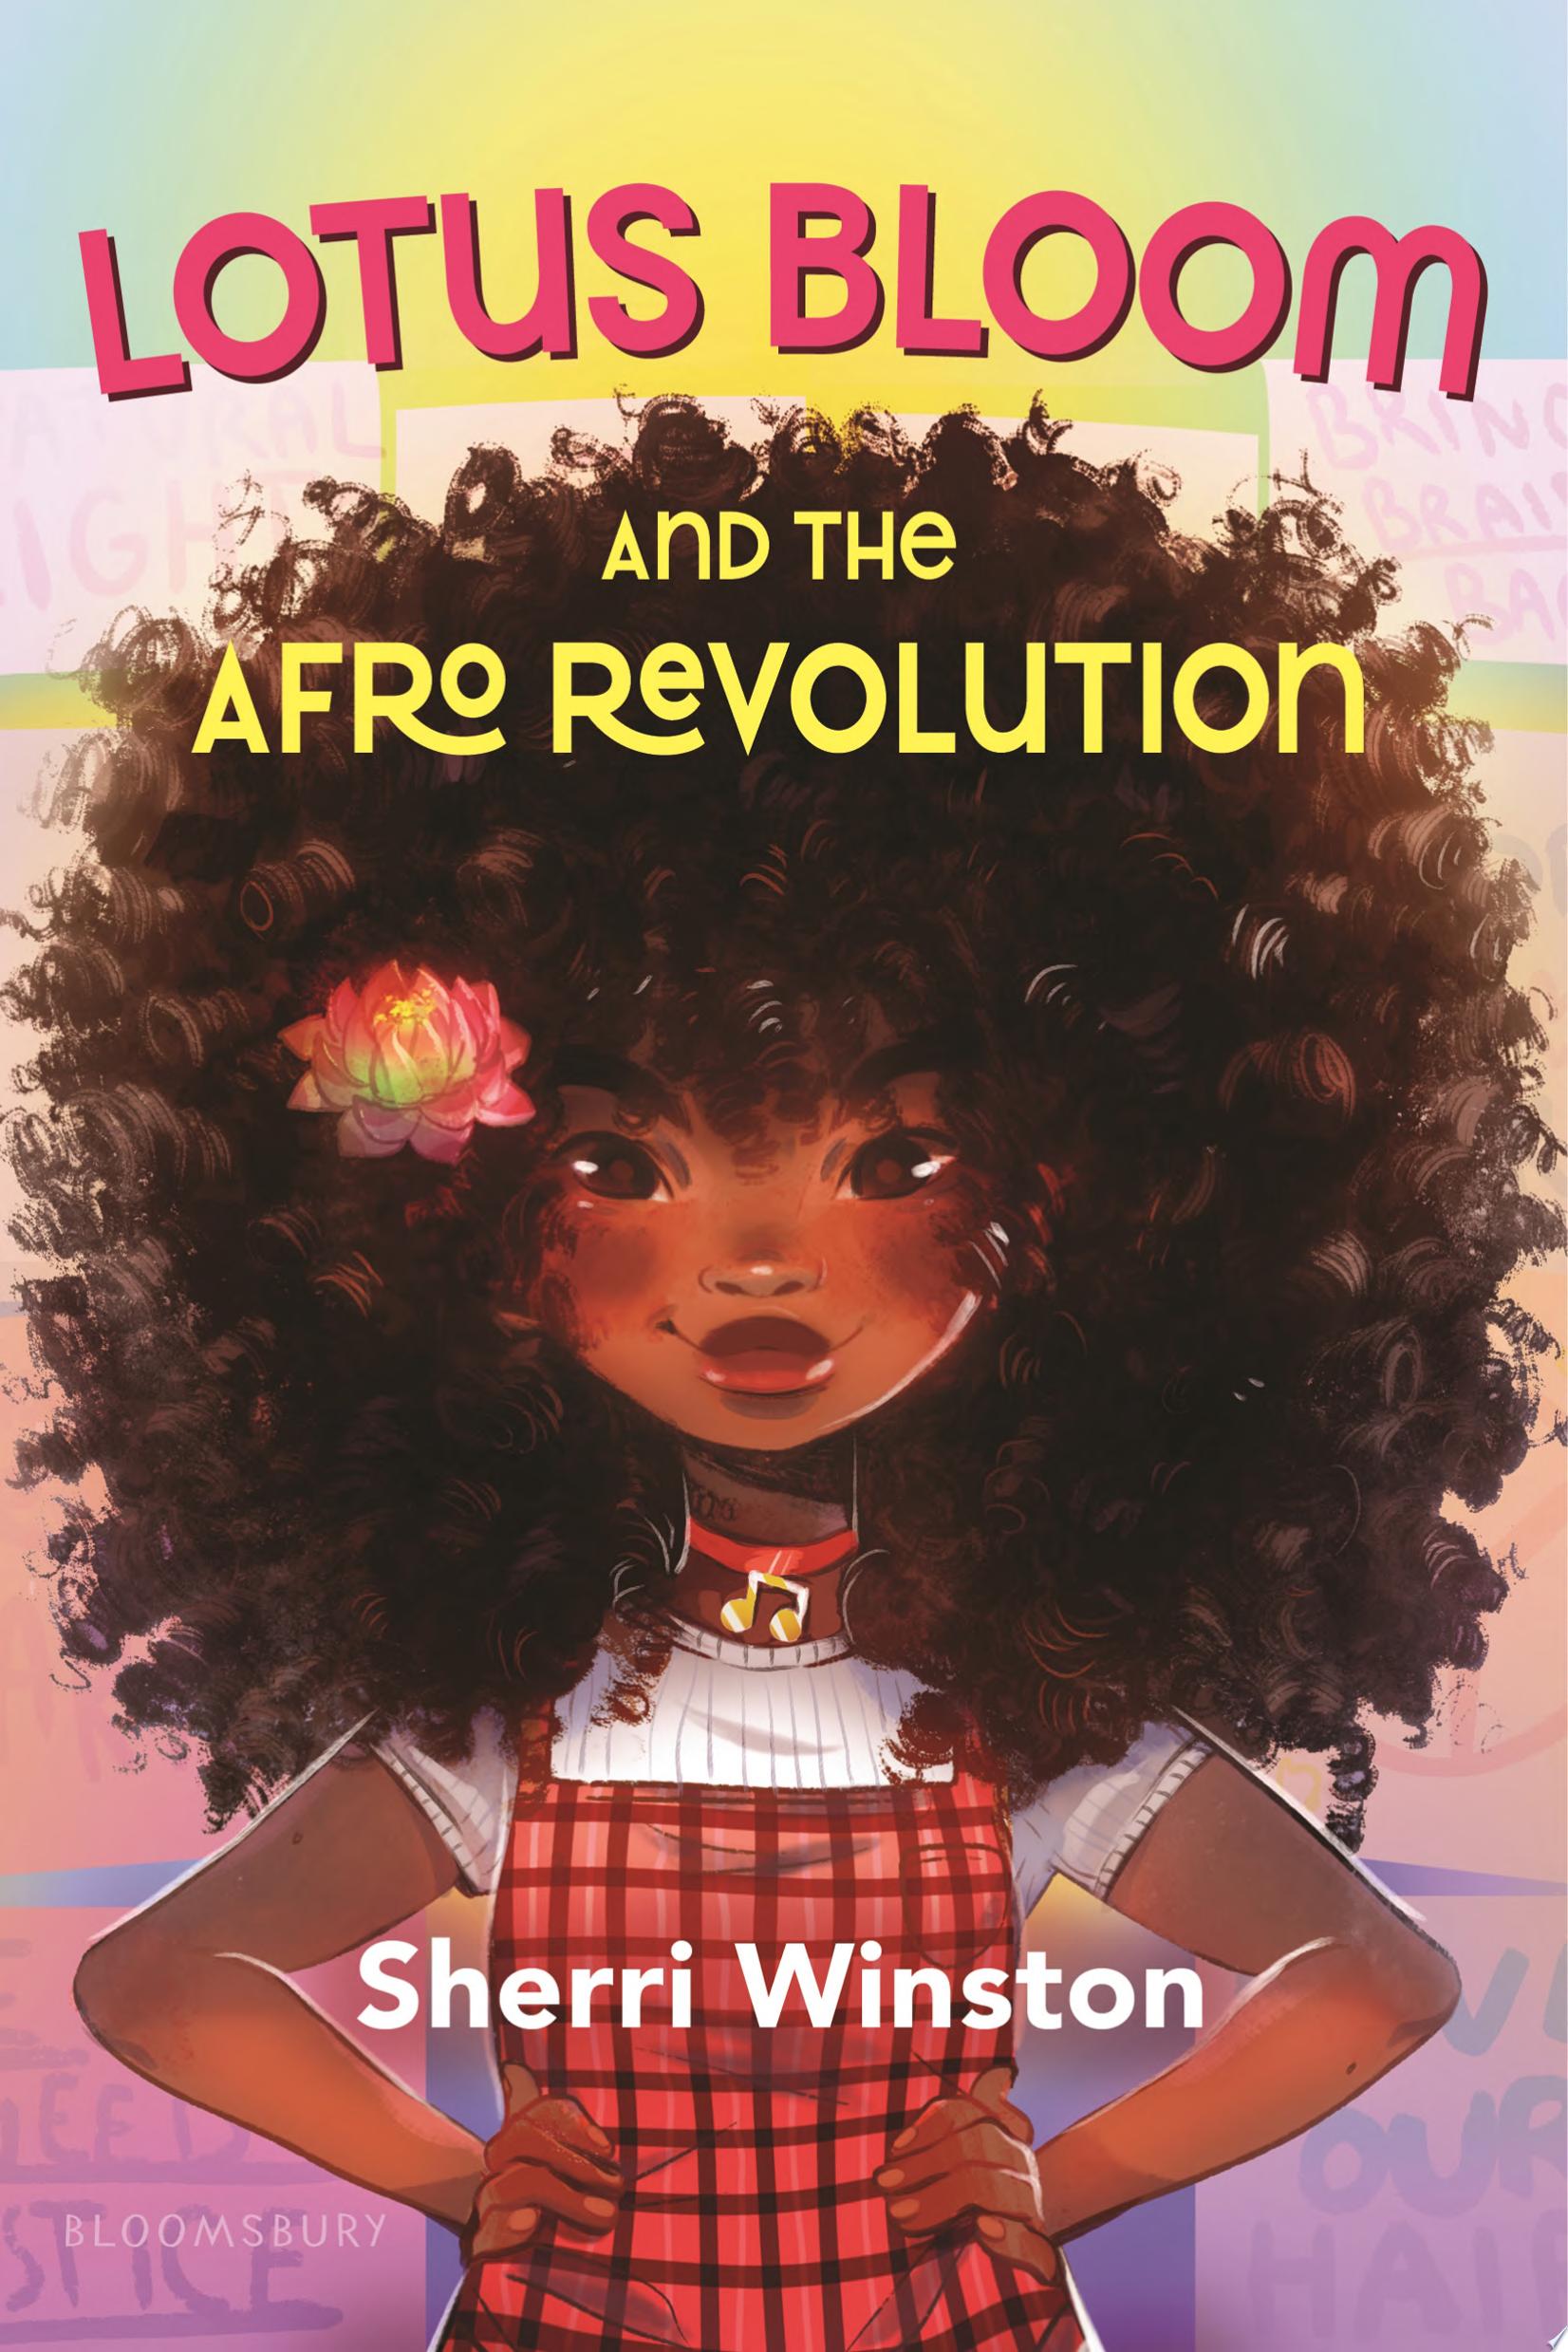 Image for "Lotus Bloom and the Afro Revolution"